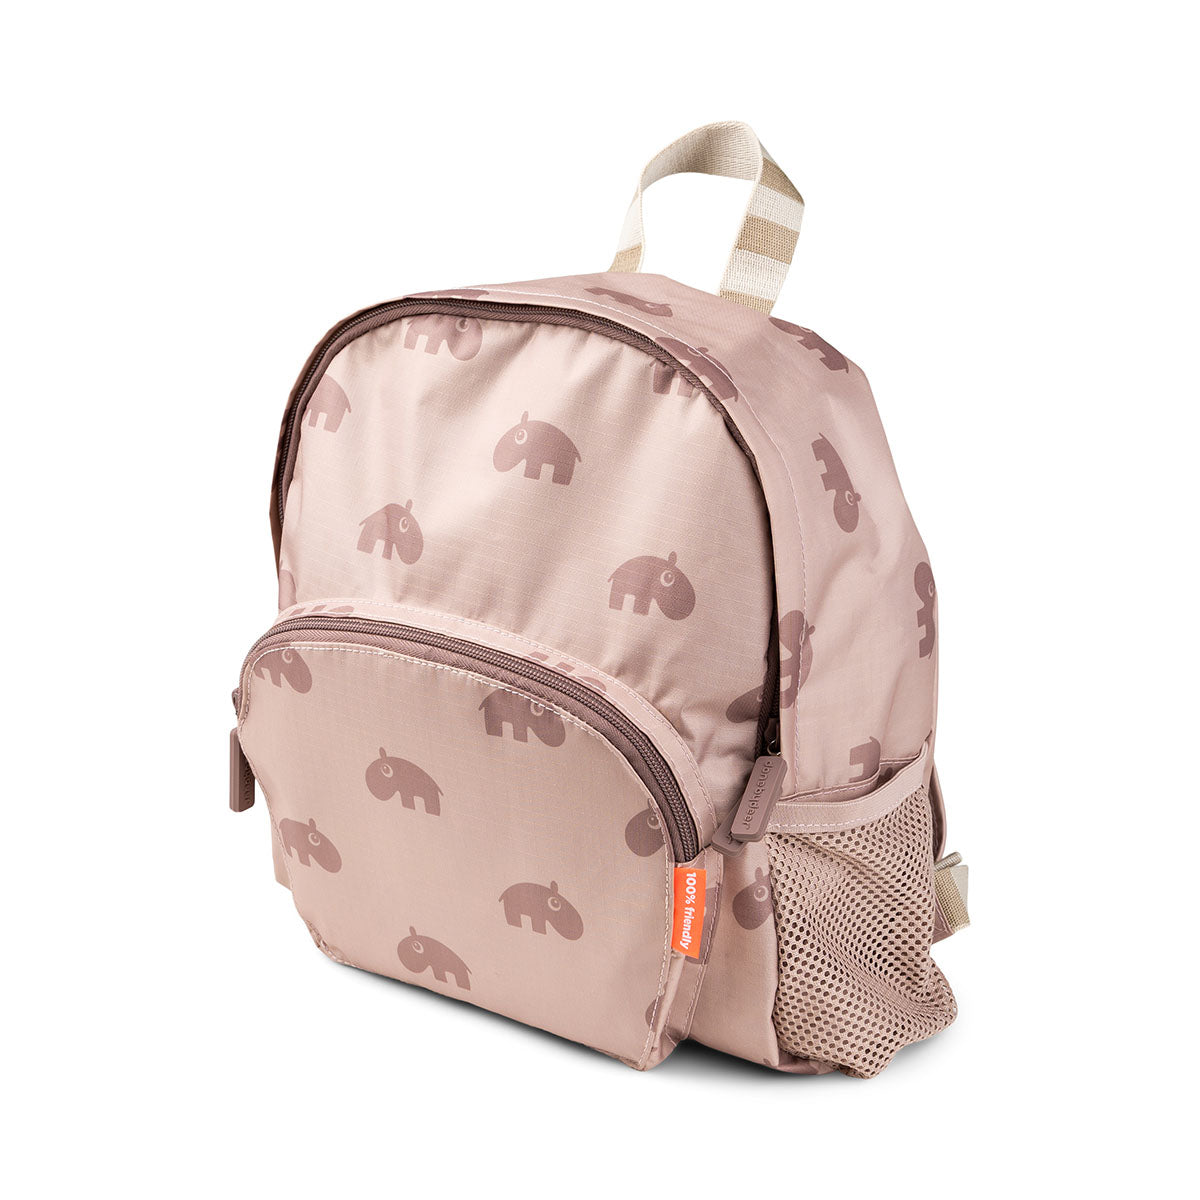 Kids insulated lunch bag - Ozzo - Powder – Done by Deer